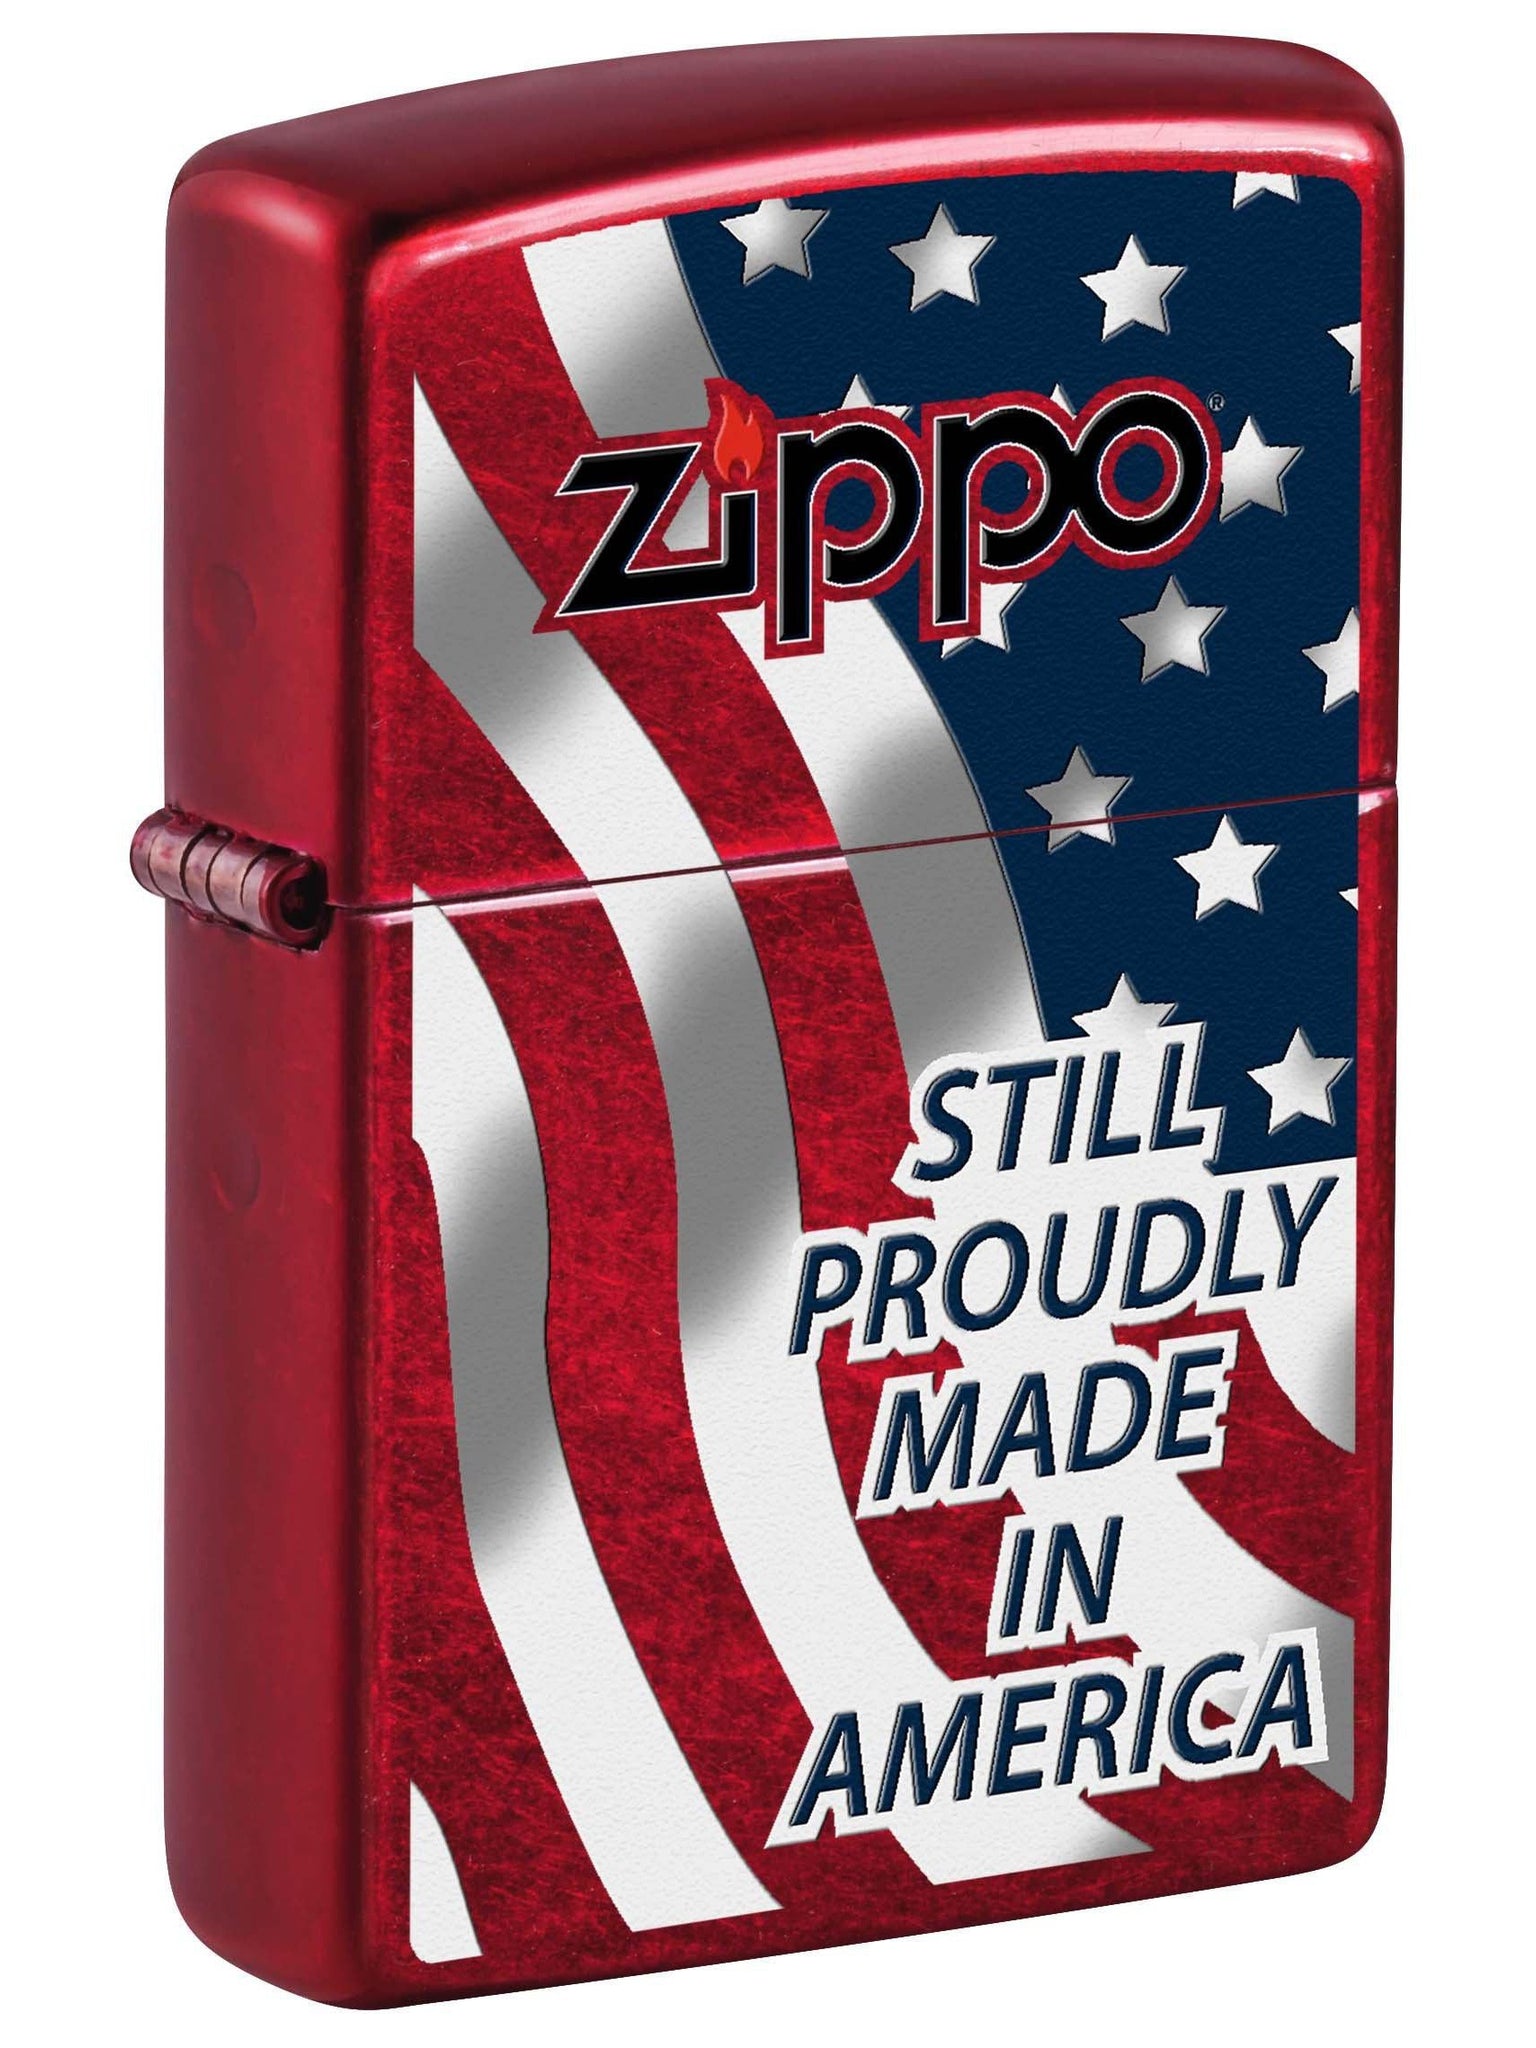 Zippo Lighter: Zippo, Still Proudly Made in America - Candy Apple Red 81012